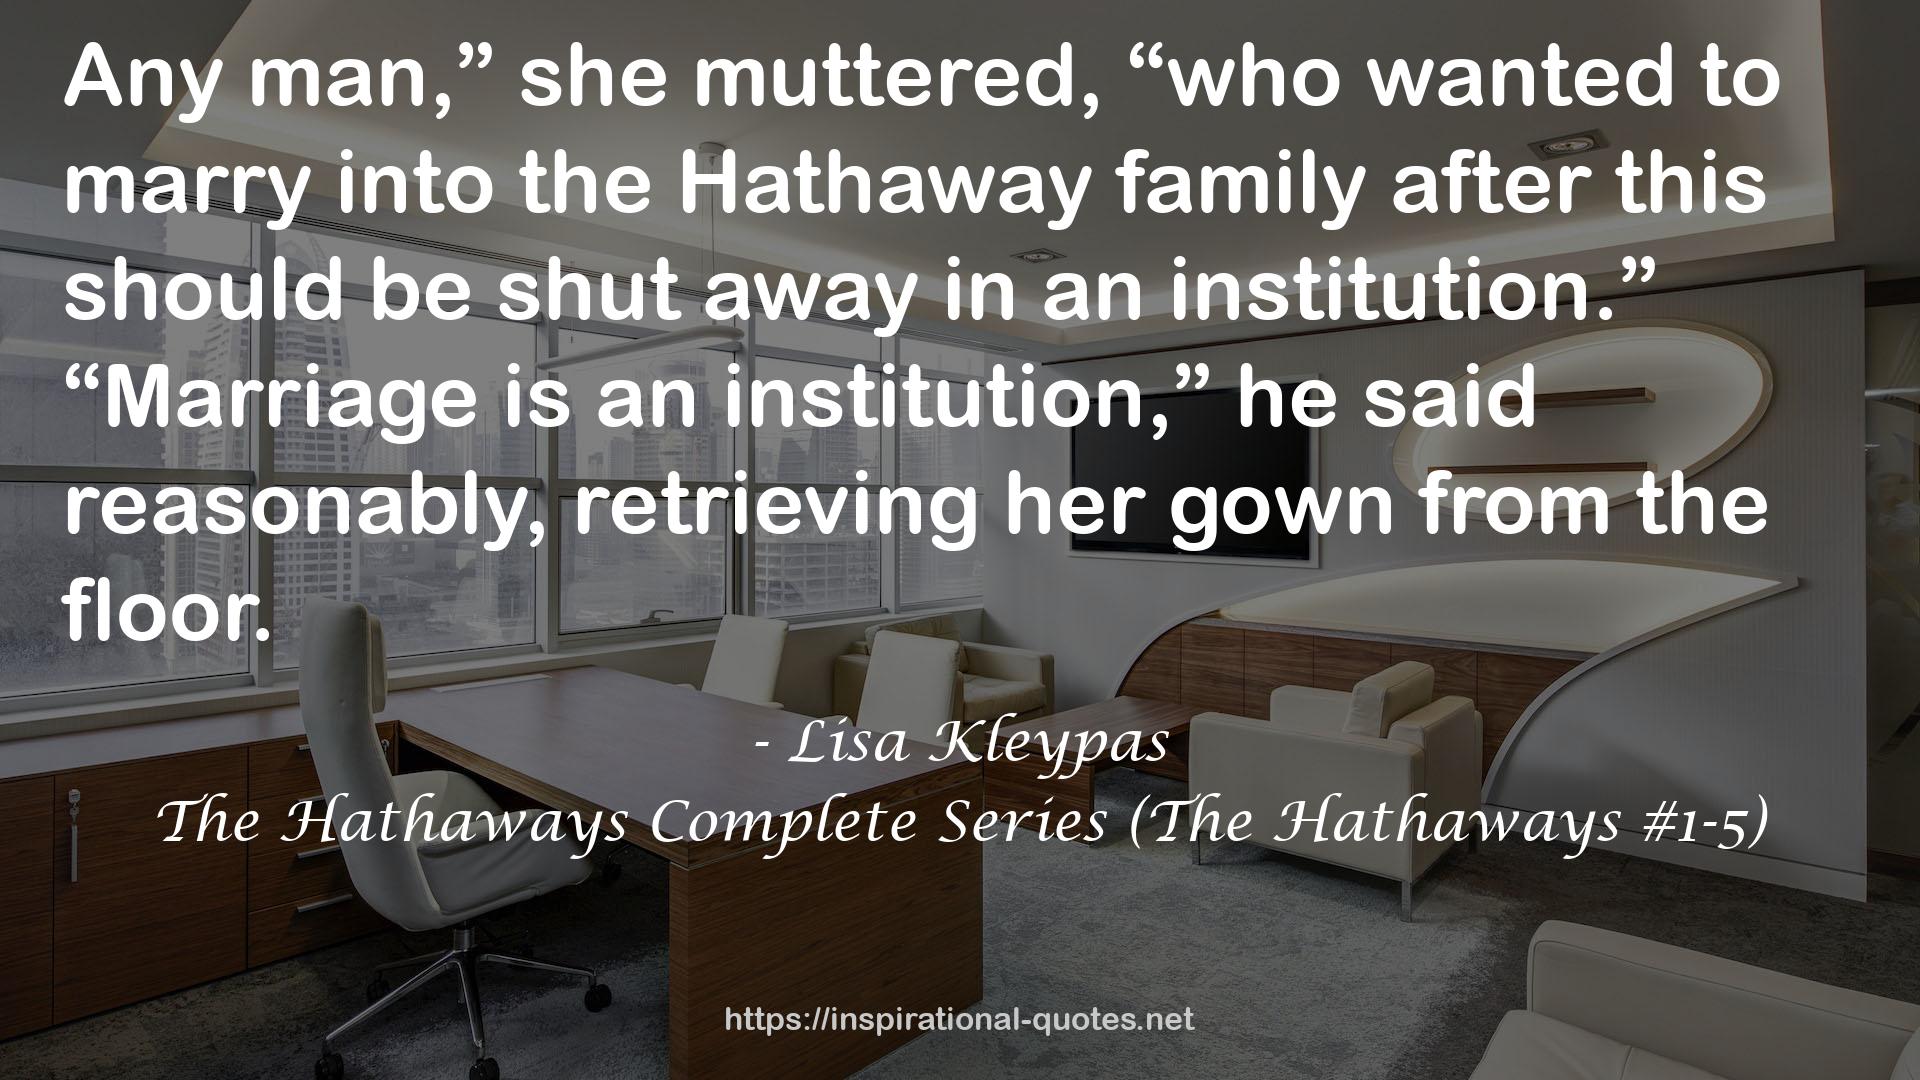 The Hathaways Complete Series (The Hathaways #1-5) QUOTES